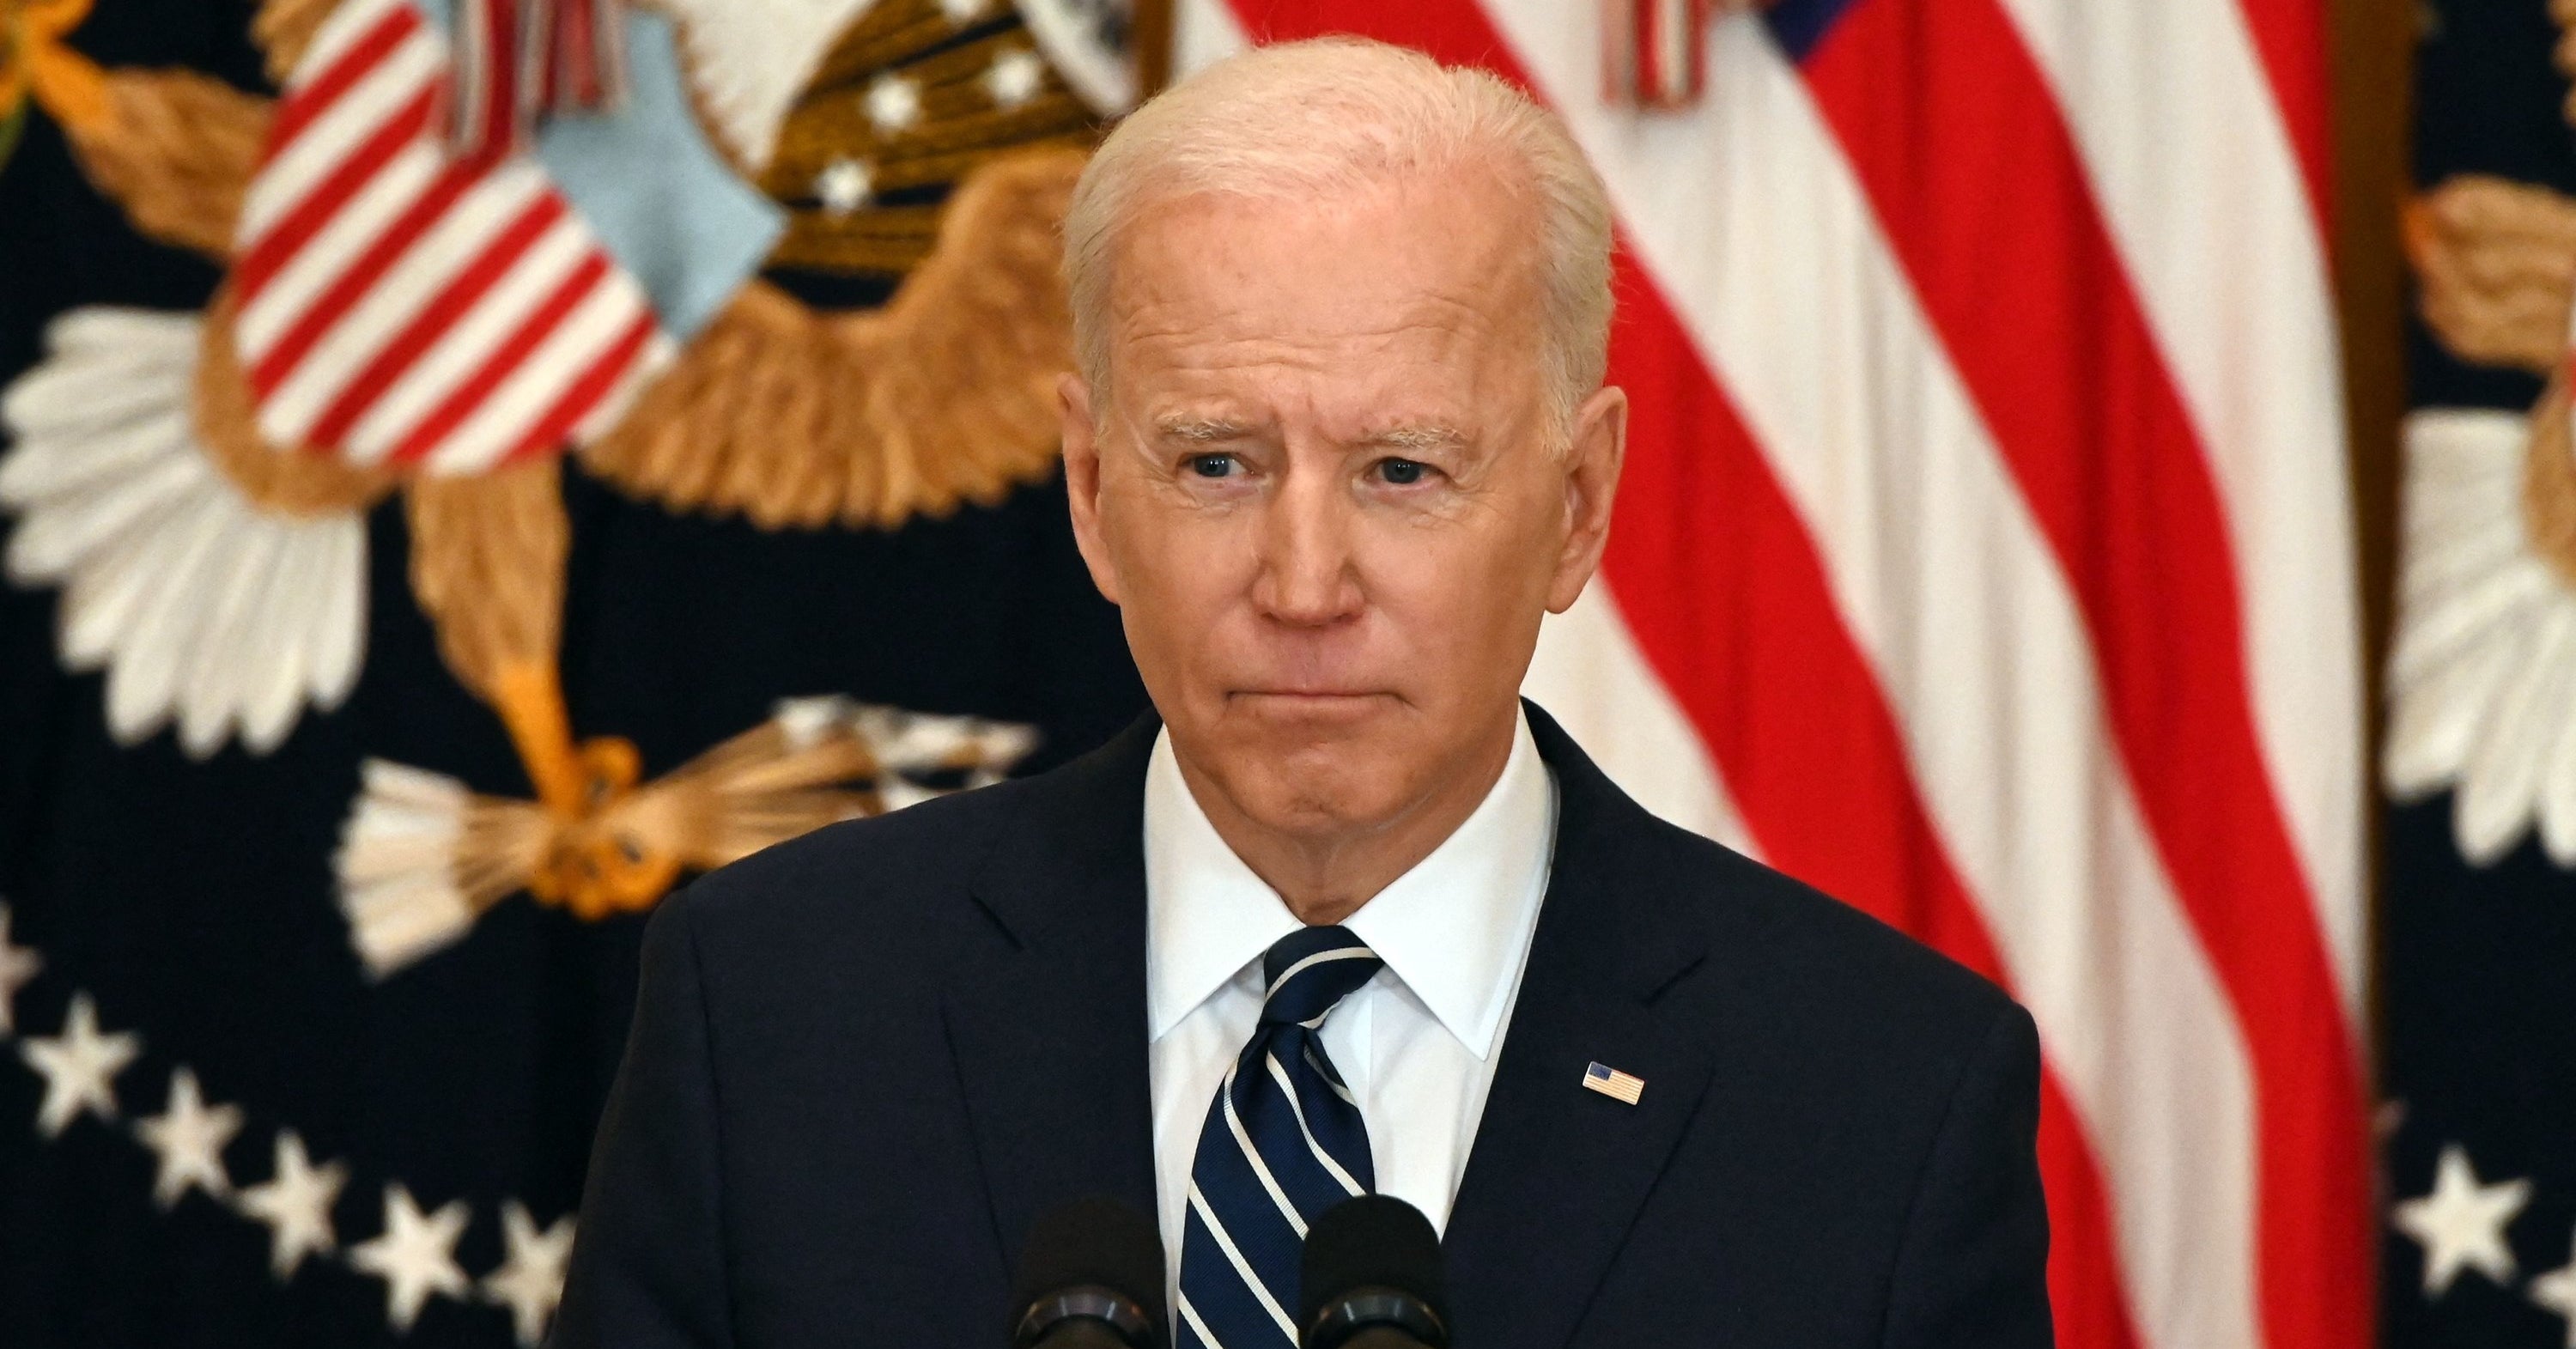 At the first press conference, Biden hit the obstruction